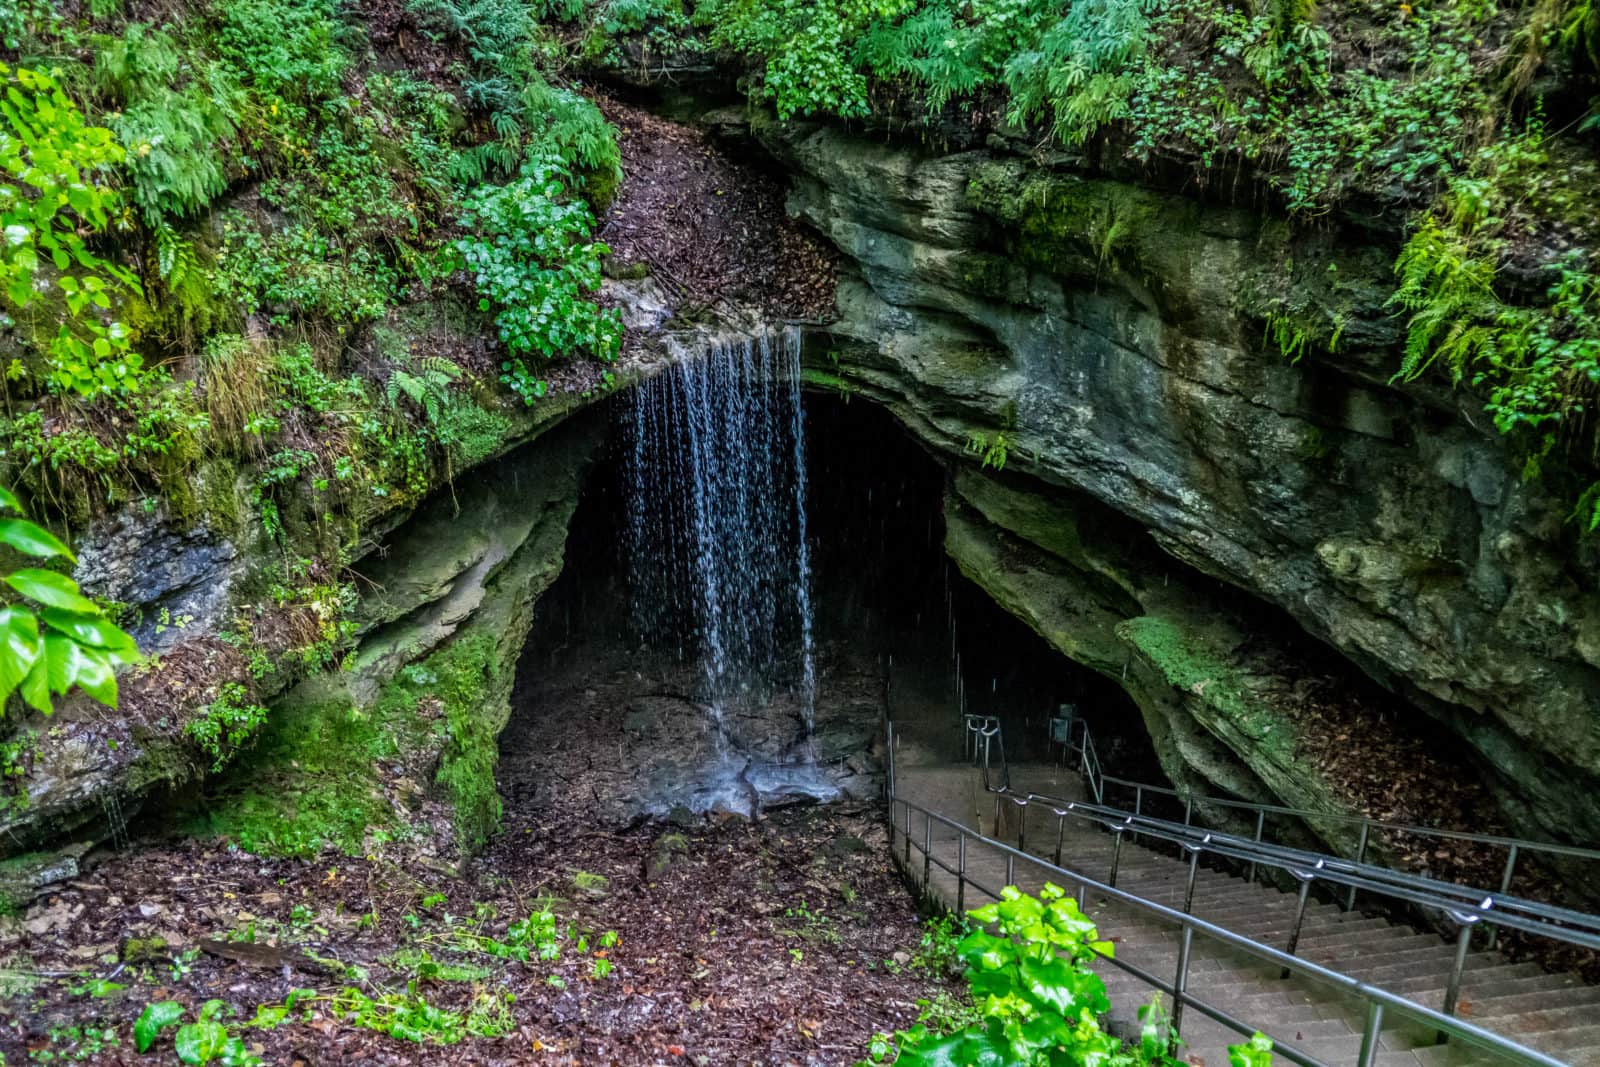 Mammoth Cave National Park In Kentucky We Love To Explore